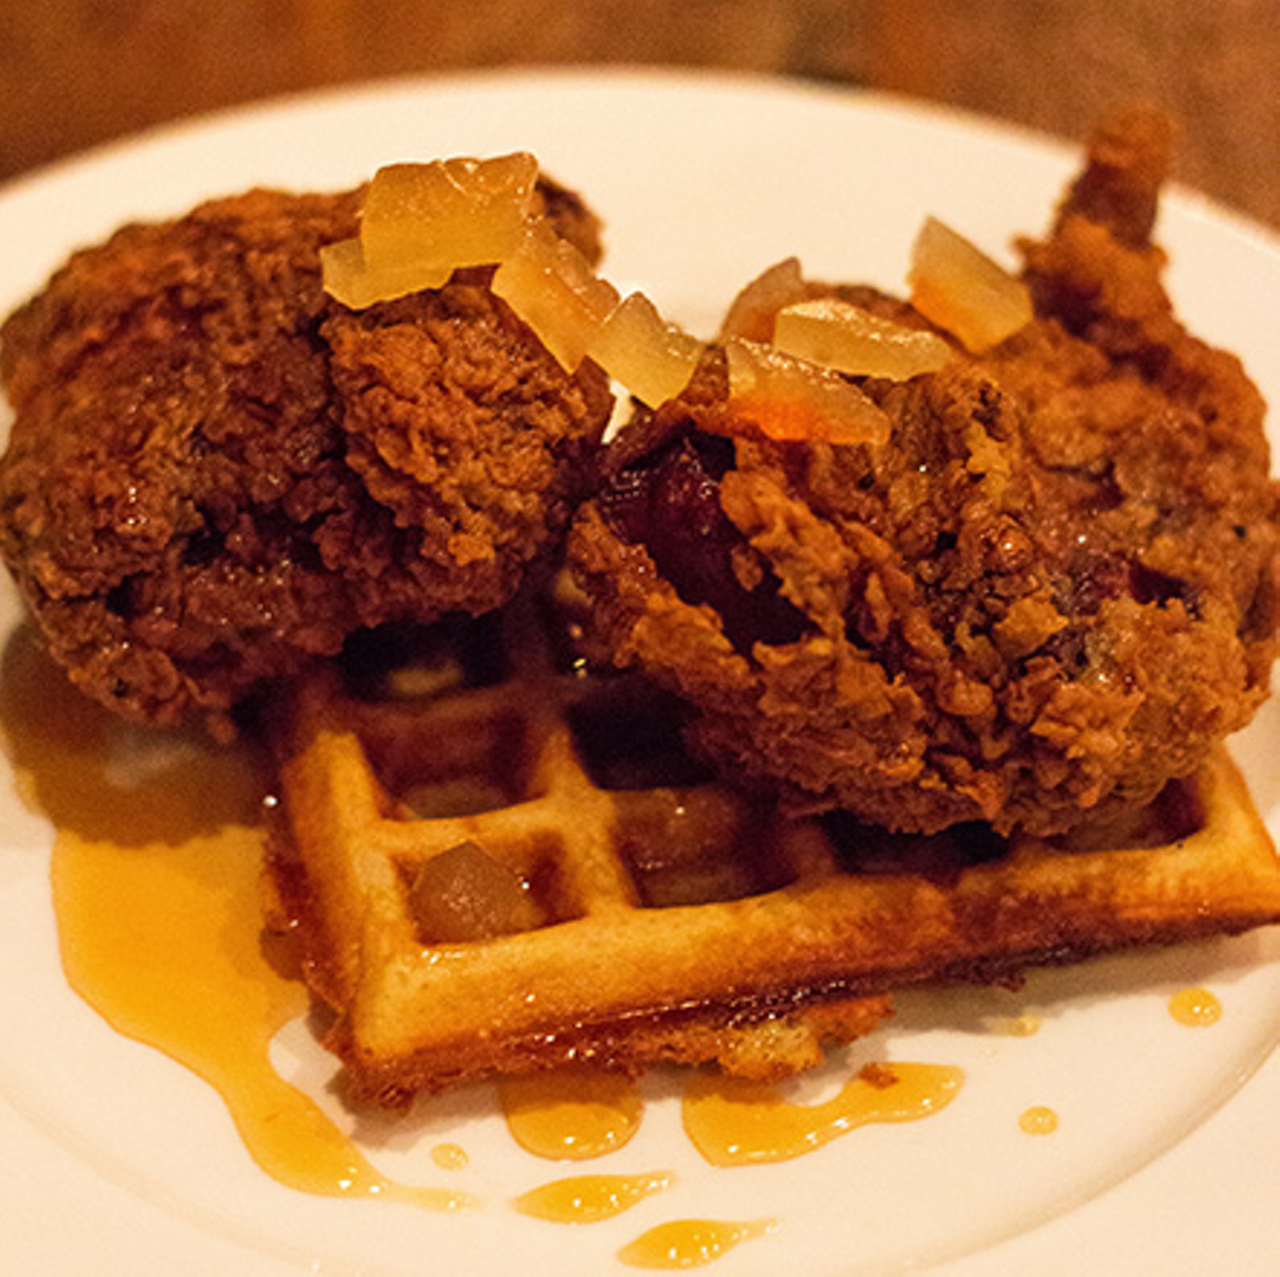 Haute Chicken and Waffles
In a 2008 episode of his television show Fatherhood, Snoop Dogg took David Beckham to his favorite dining spot, Roscoe's Chicken and Waffles, for a taste of L.A.'s famous soul food. The tables were formica, the menus were covered in plastic sneeze guards, and a wine pairing meant ordering a Bartles & James from the beverage list. Roscoe's wasn't being ironic. It was just serving honest soul food, smothered in syrup and grease, to those looking for Southern-inspired comfort. Fast-forward five years, and this once humble fried fare has found its way onto the chicest menus in town. Sandwiched somewhere between foie gras and truffles, chicken and waffles has achieved haute status. No longer is simple maple syrup sufficient for such an elite dish. Now highbrow, they come topped with everything from poached quail egg to sriracha aioli. There are online resources dedicated to chicken-and-waffles wine pairings, and even the venerable Thomas Keller has gotten in on it. Granted, some of the world's most notable dishes had humble beginnings -- think cassoulet or pizza -- but this seems like more of a short-lived trend than a permanent fixture on upscale menus. Any excuse to don eveningwear and dig our manicured fingers into a platter of diner food is good by us, but being charged a week's salary for something we can get at IHOP feels a bit like a rip-off. -- Cheryl Baehr